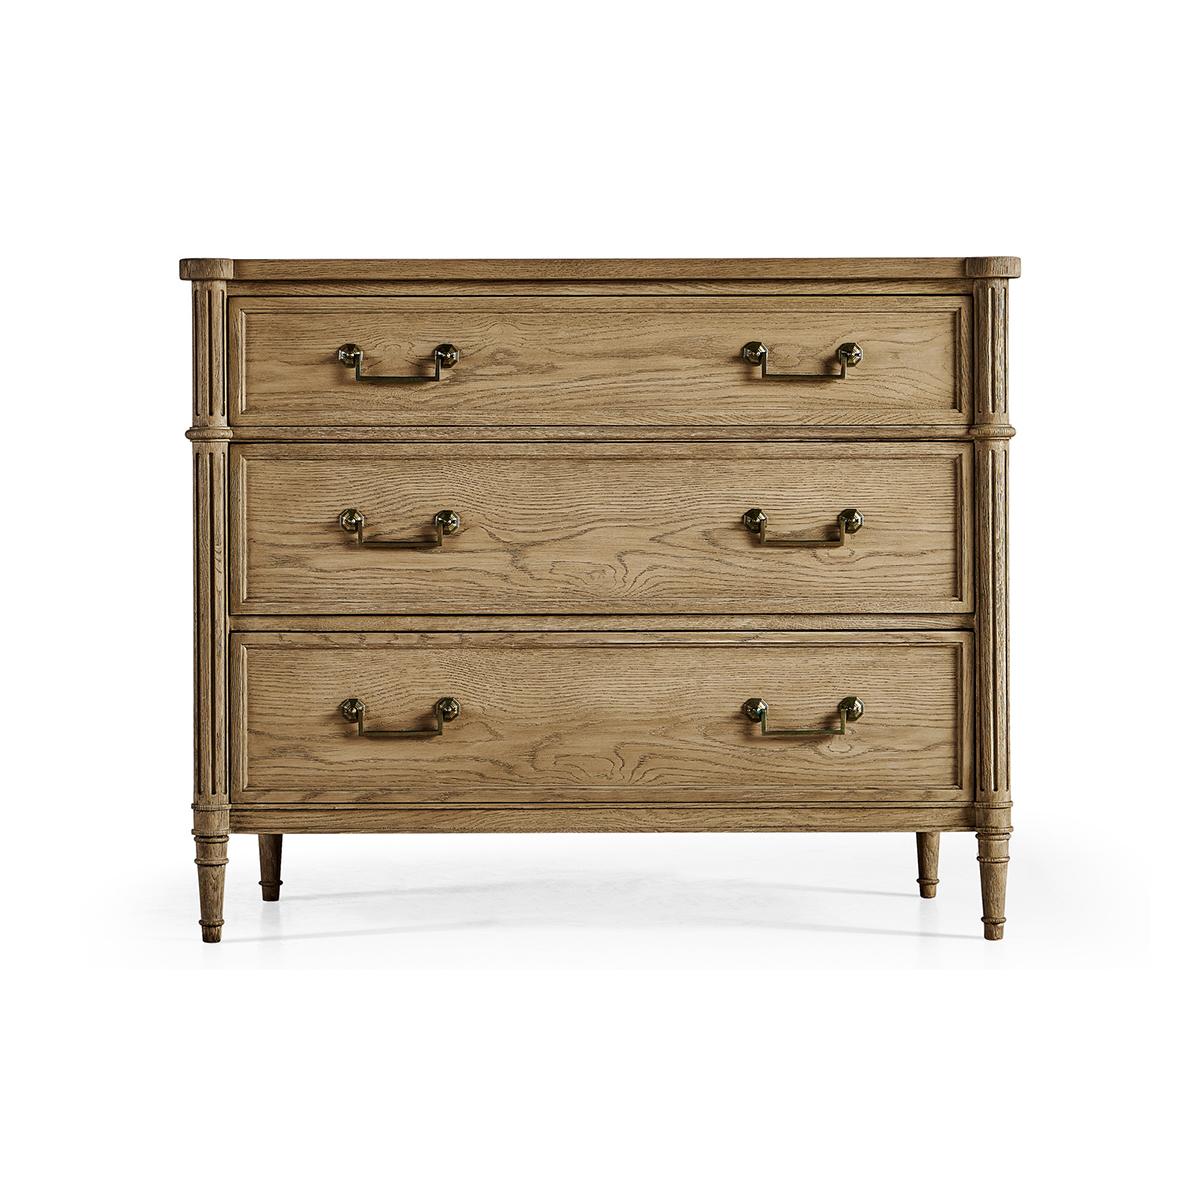 French Louis XVI style Commode, made with chestnut in a natural stripped finish that marries effortlessly with custom-cast hardware. Turret corners, fluted styles, three long drawers and turned and tapered legs. A versatile piece that elevates both